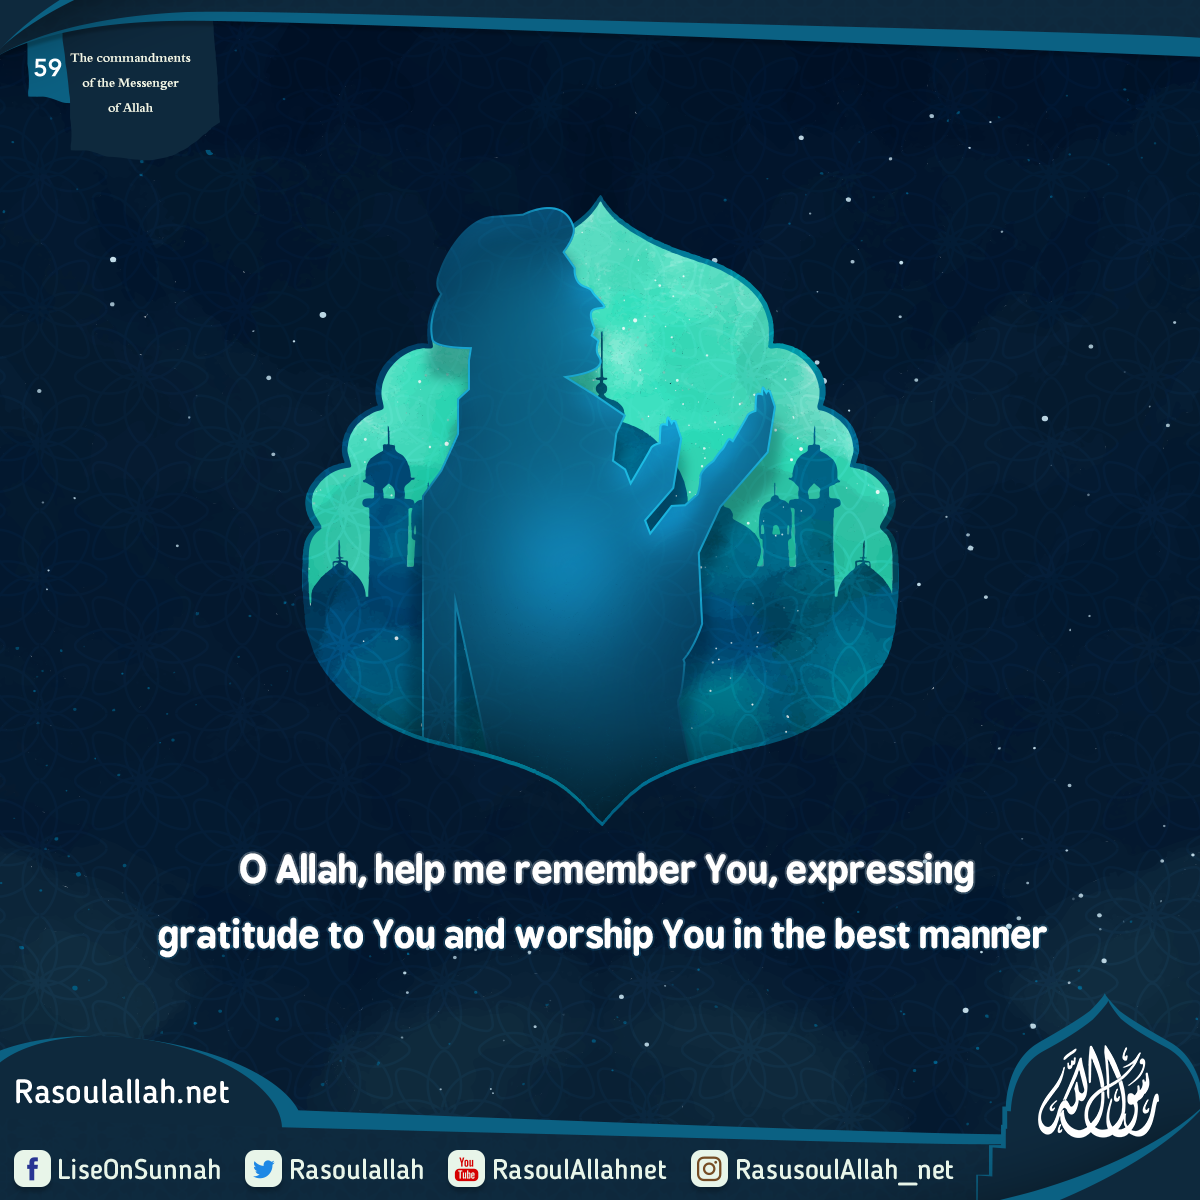 O Allah, help me remember You, expressing gratitude to You and worship You in the best manner